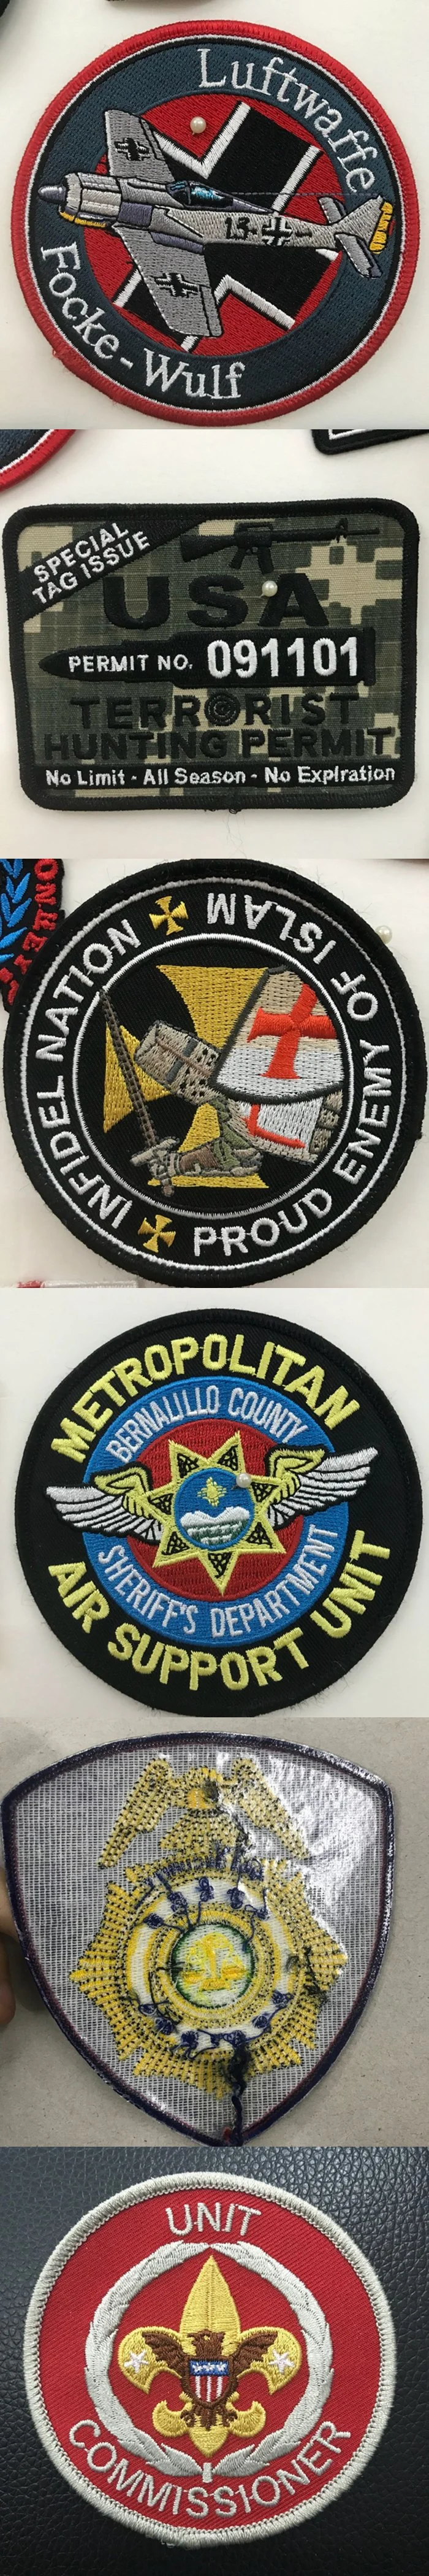 Custom Embroidery Iron on Air Force Patches and Scout Badges